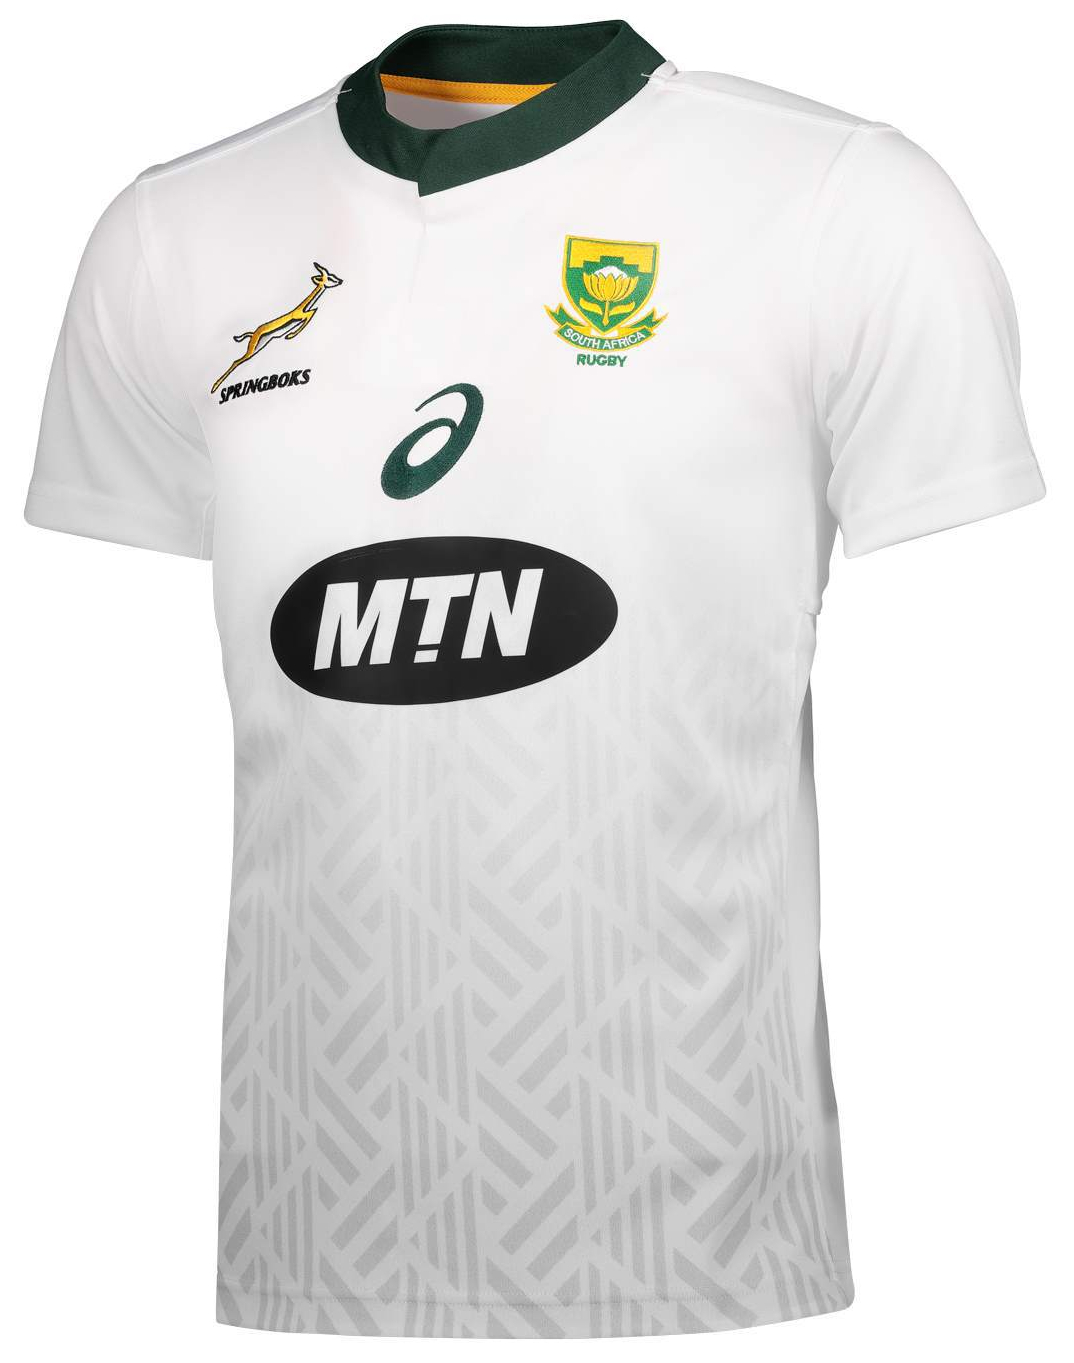 south africa rugby shirt 2018